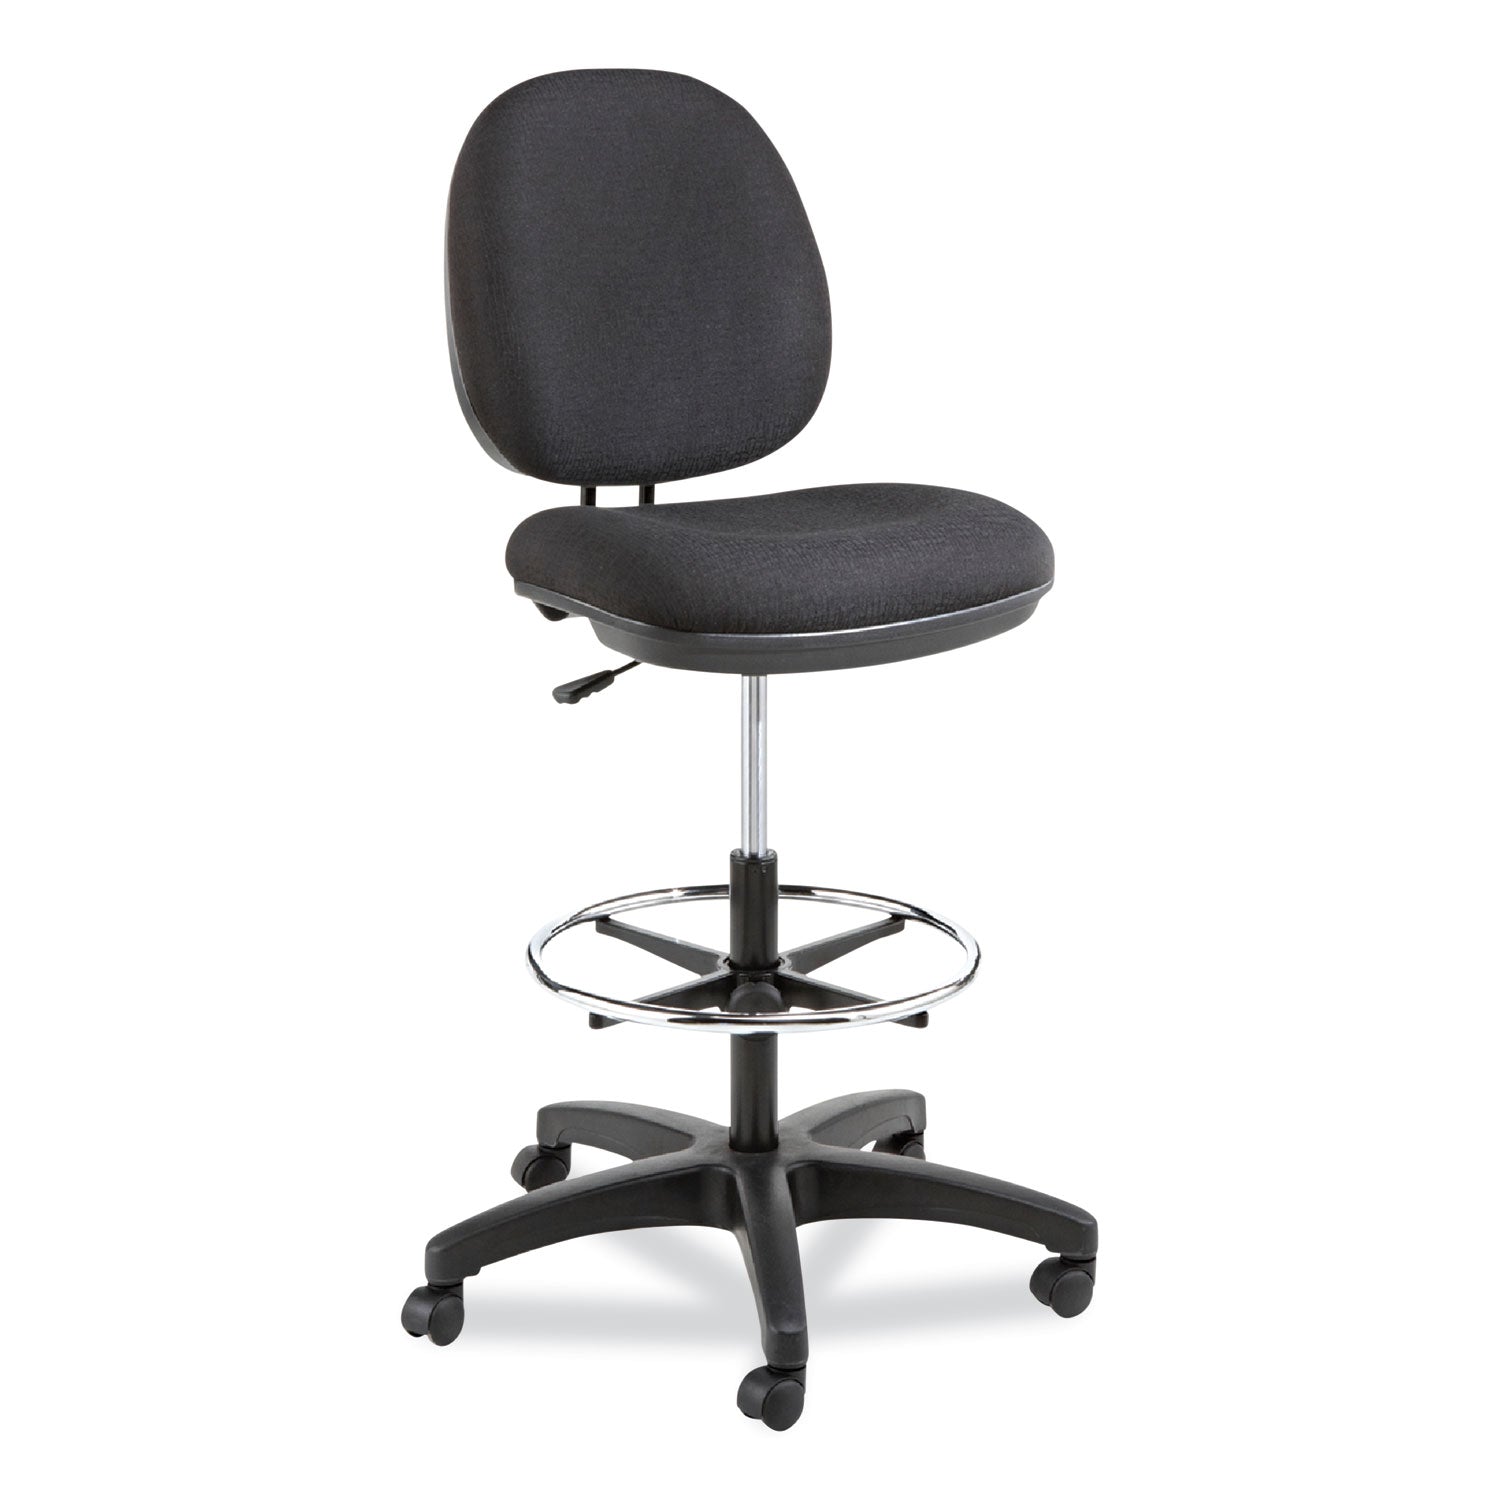 Alera Interval Series Swivel Task Stool, Supports Up to 275 lb, 23.93" to 34.53" Seat Height, Black Fabric - 